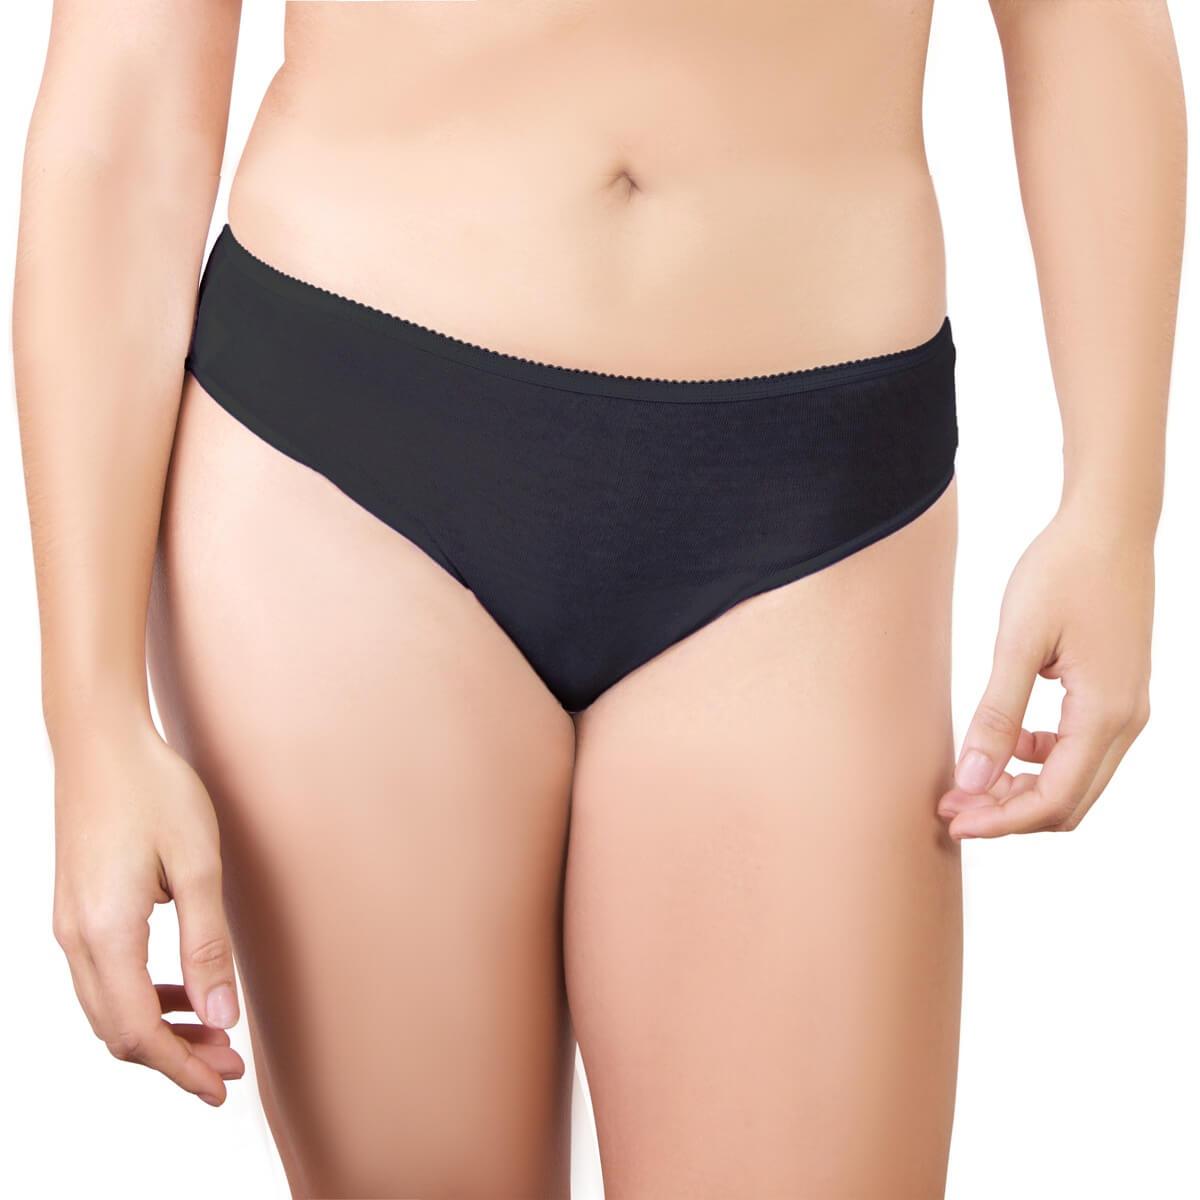 Disposable black cotton knickers pants briefs for hospital maternity – OW- Travel